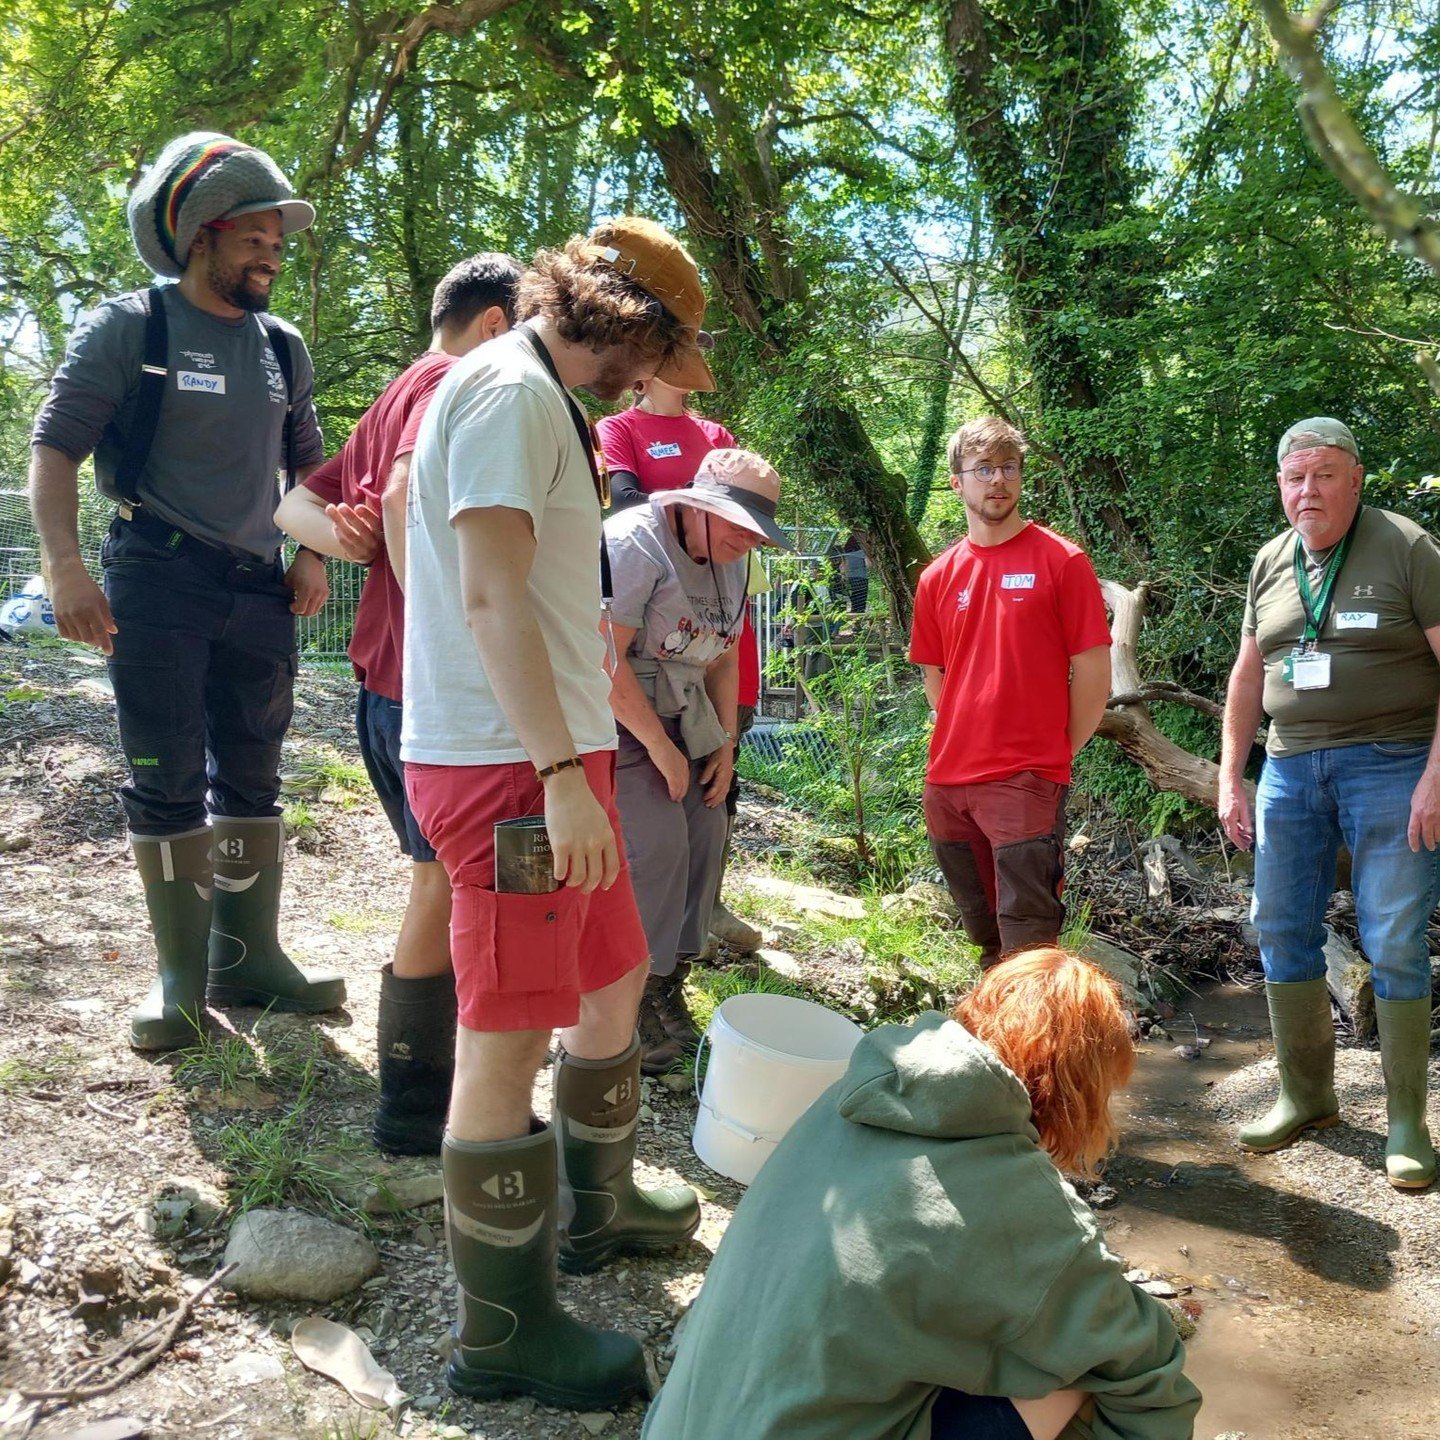 🚨 NEW GROUP ALERT 

Some great pictures of newly trained monitors from the Riverfly workshop at Poole Farm Plymouth.

Welcome aboard to the Riverfly Partnership Plymouth Natural Grid ARMI Group!

Interested in setting up your own group? For more inf